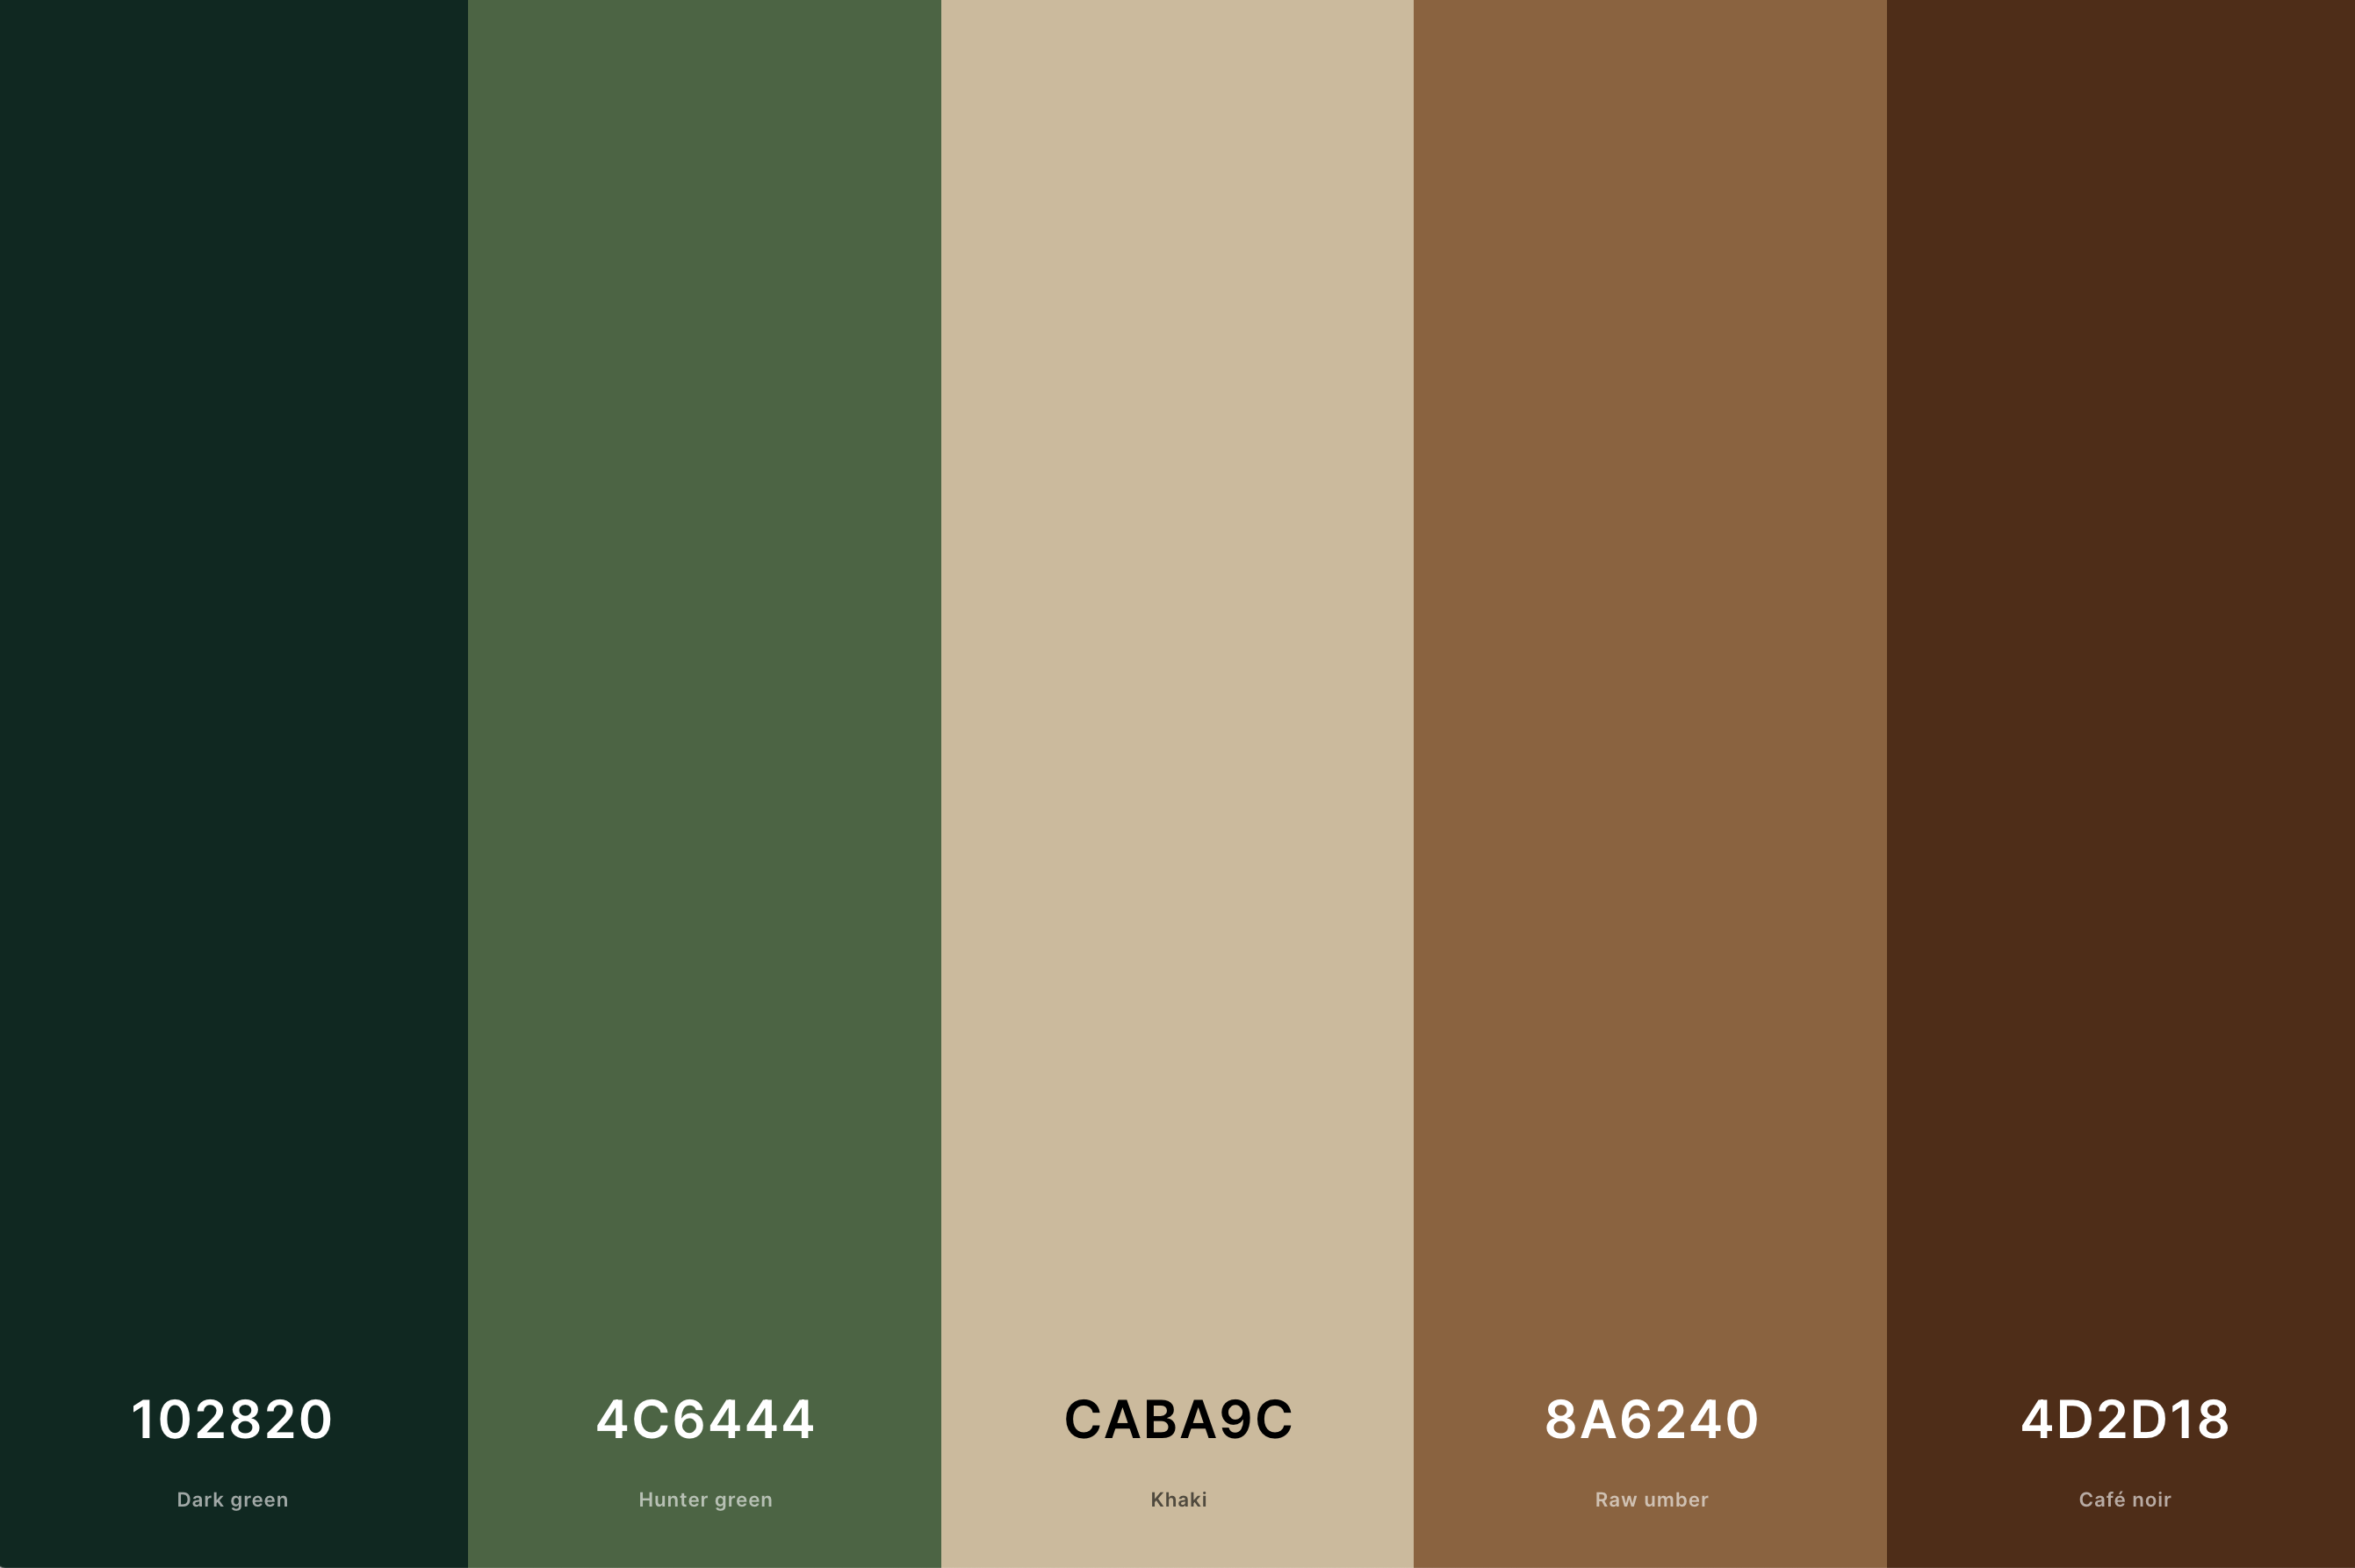 20 Brown Color Palettes with Names and Hex Codes – CreativeBooster